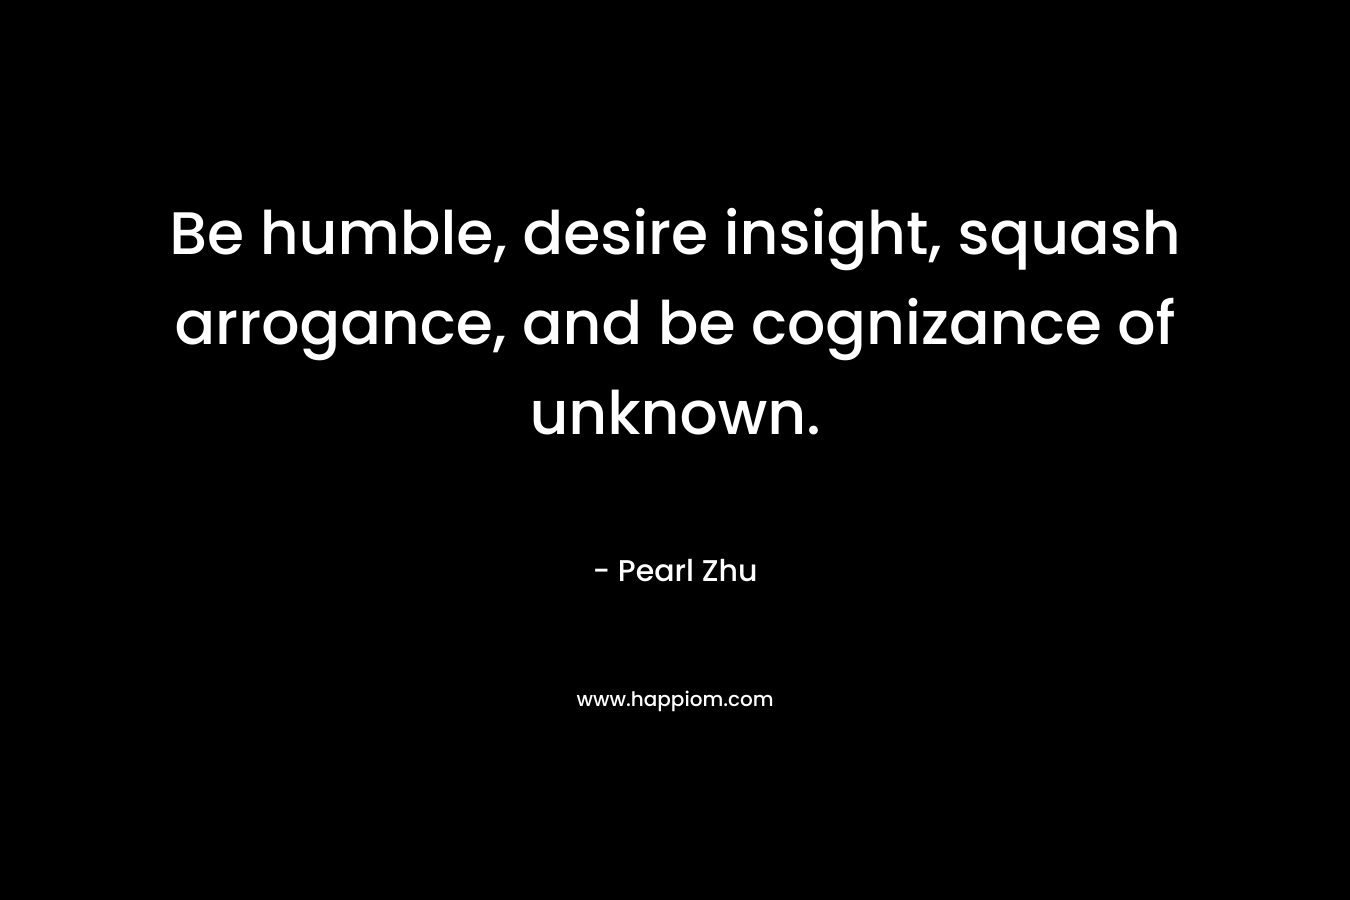 Be humble, desire insight, squash arrogance, and be cognizance of unknown.